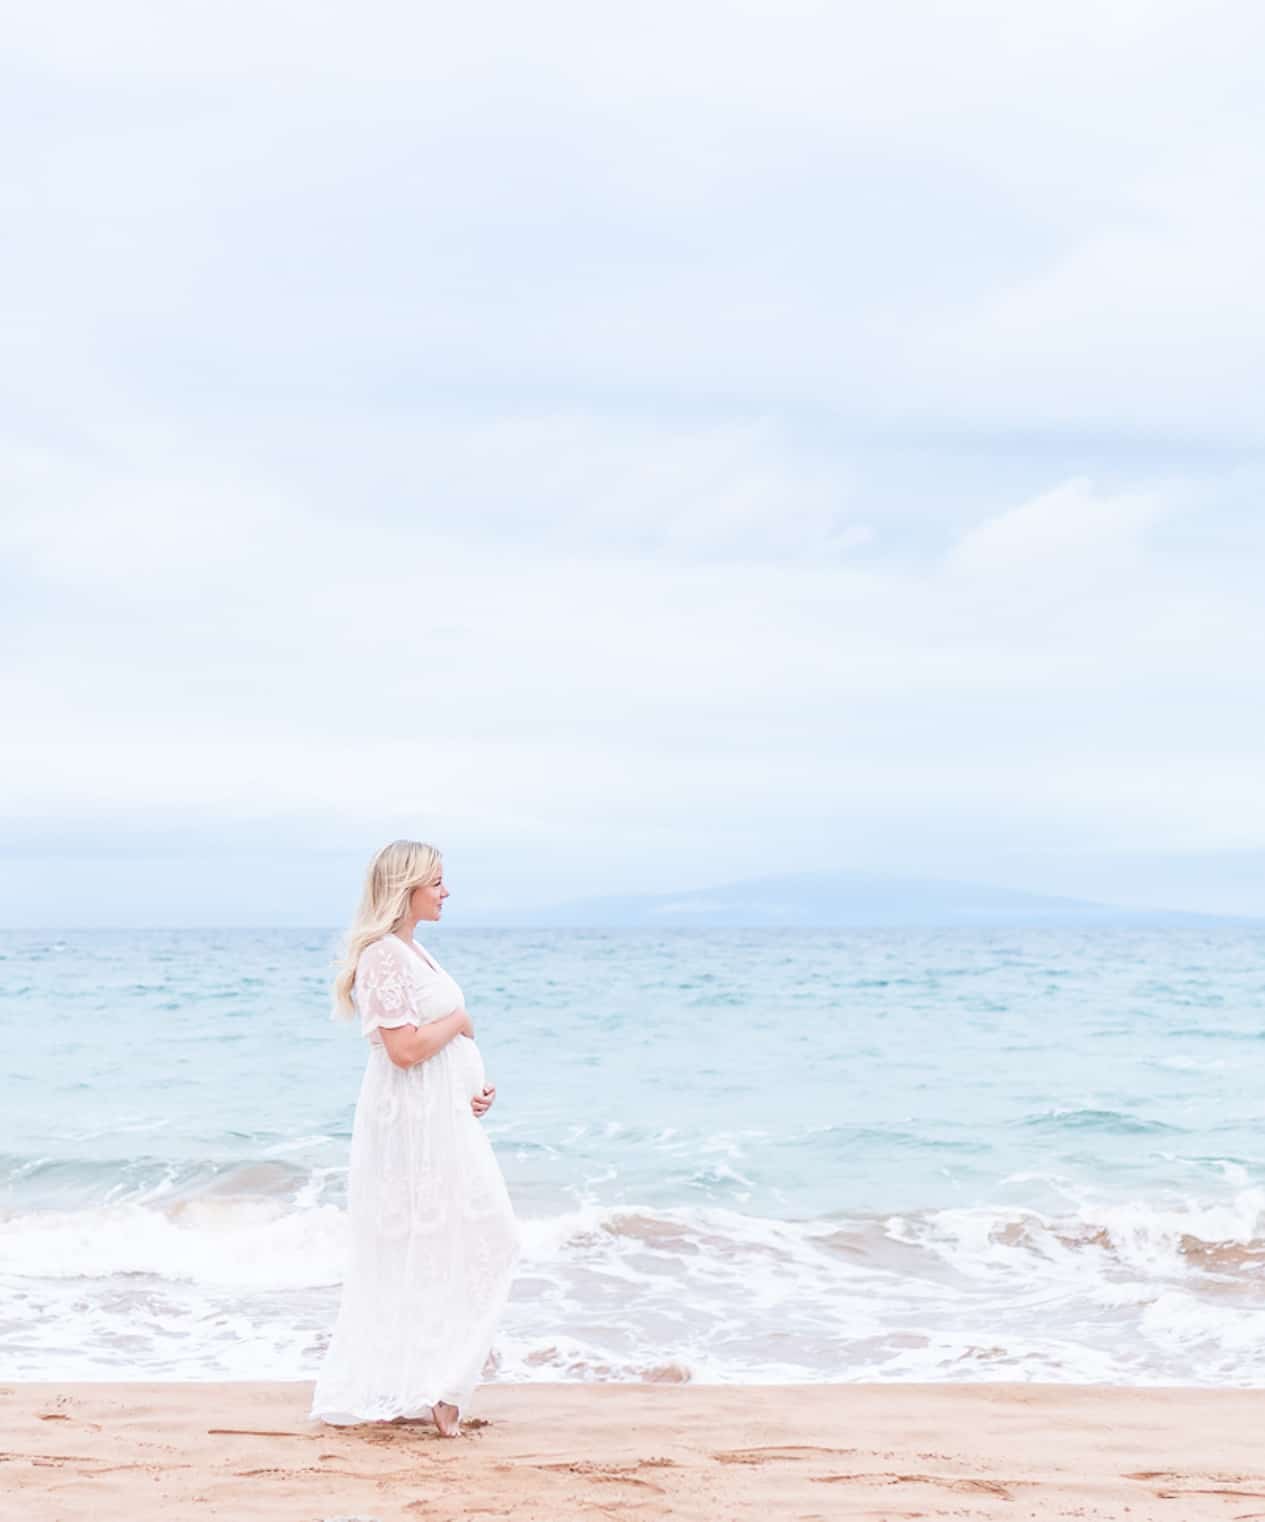 image of a woman from a distance standing on a beach in front of the ocean wearing a white flowy dress embracing her pregnant belly